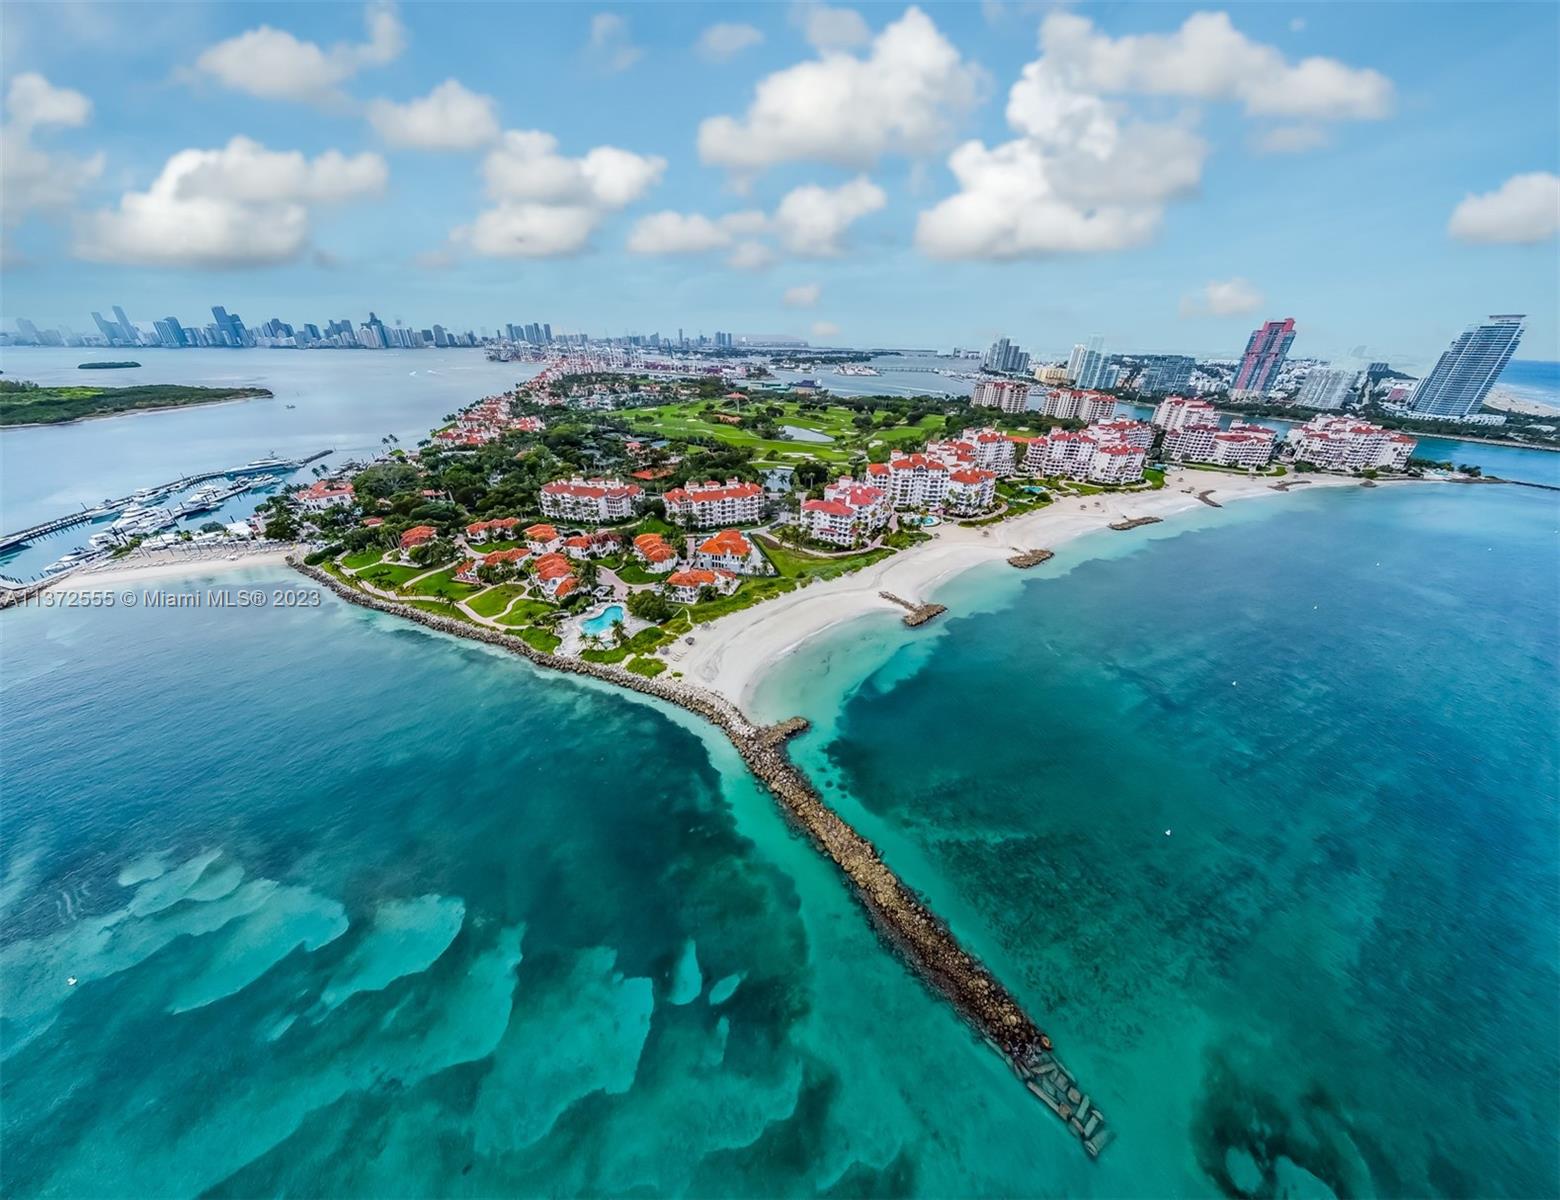 WELCOME TO SEASIDE AT FISHER ISLAND. A RARE OPPORTUNITY AWAITS YOU. ONE OF THE MOST DESIRED LOCATIONS ON FISHER ISLAND JUST STEPS TO BEACH CLUB, PRIVATE BEACH, SPA, GYM, AND POOL. THIS UPDATED UNIT BOASTS 3 BEDROOMS, 2 BATHROOMS. YOUR TROPICAL OASIS AWAITS.